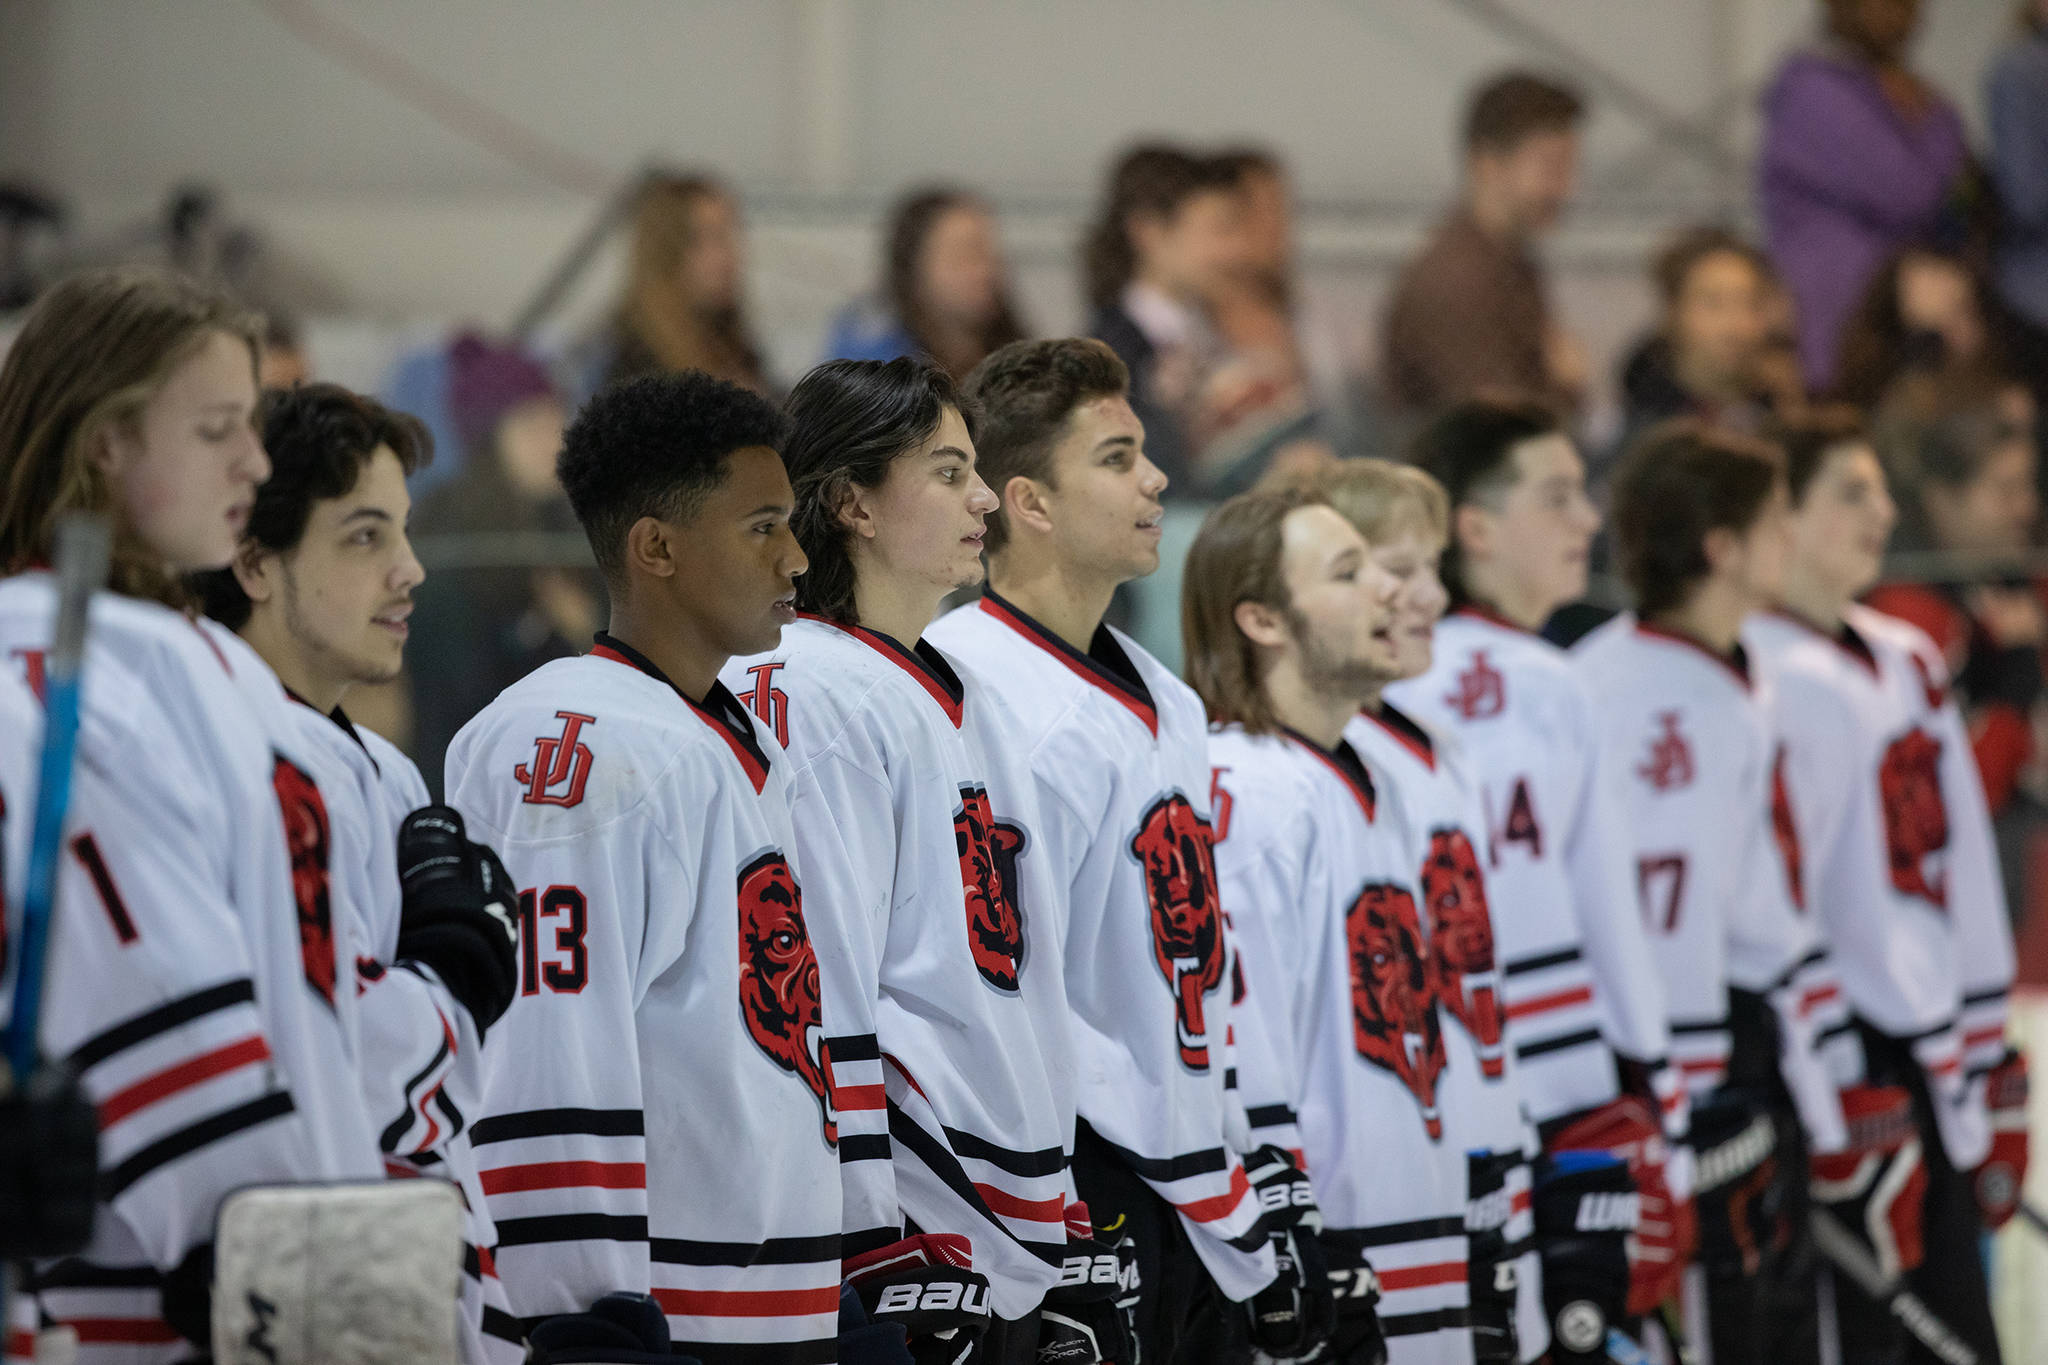 The Juneau-Douglas High School hockey team sings the national anthem prior to its game against Homer at Treadwell Arena on Saturday, Jan. 20, 2019. JDHS coaches Luke Adams and Matt Boline honored 12 seniors prior to the start of the game, the final varsity home match of the season. (Courtesy Photo | Carol Lahnum/CrowFoxPhotography.com)